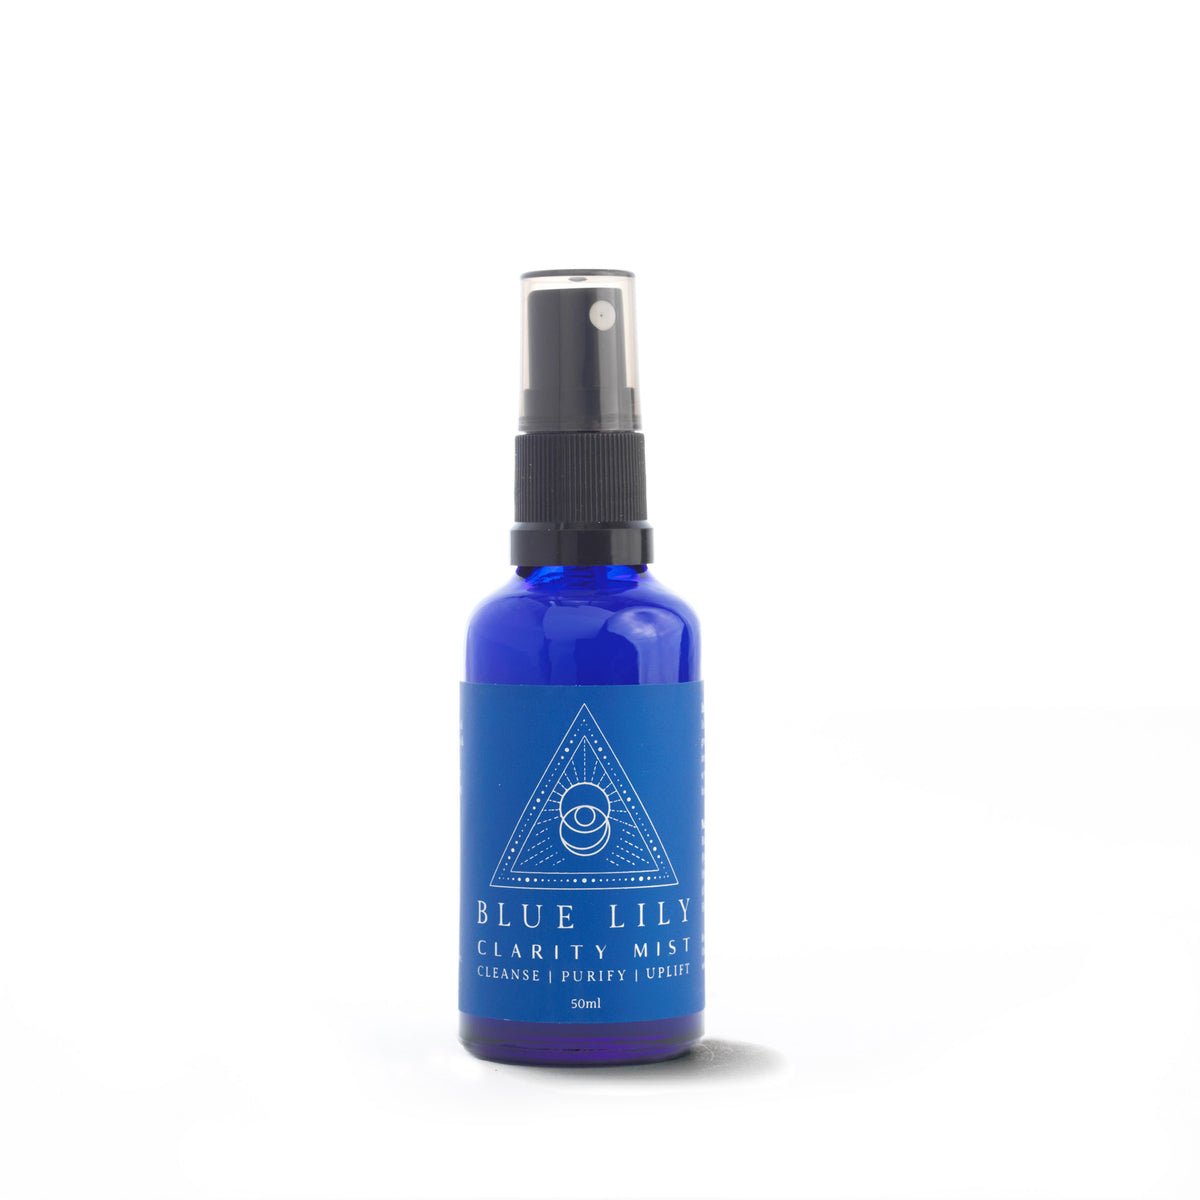 Blue Lily Clarity Mist